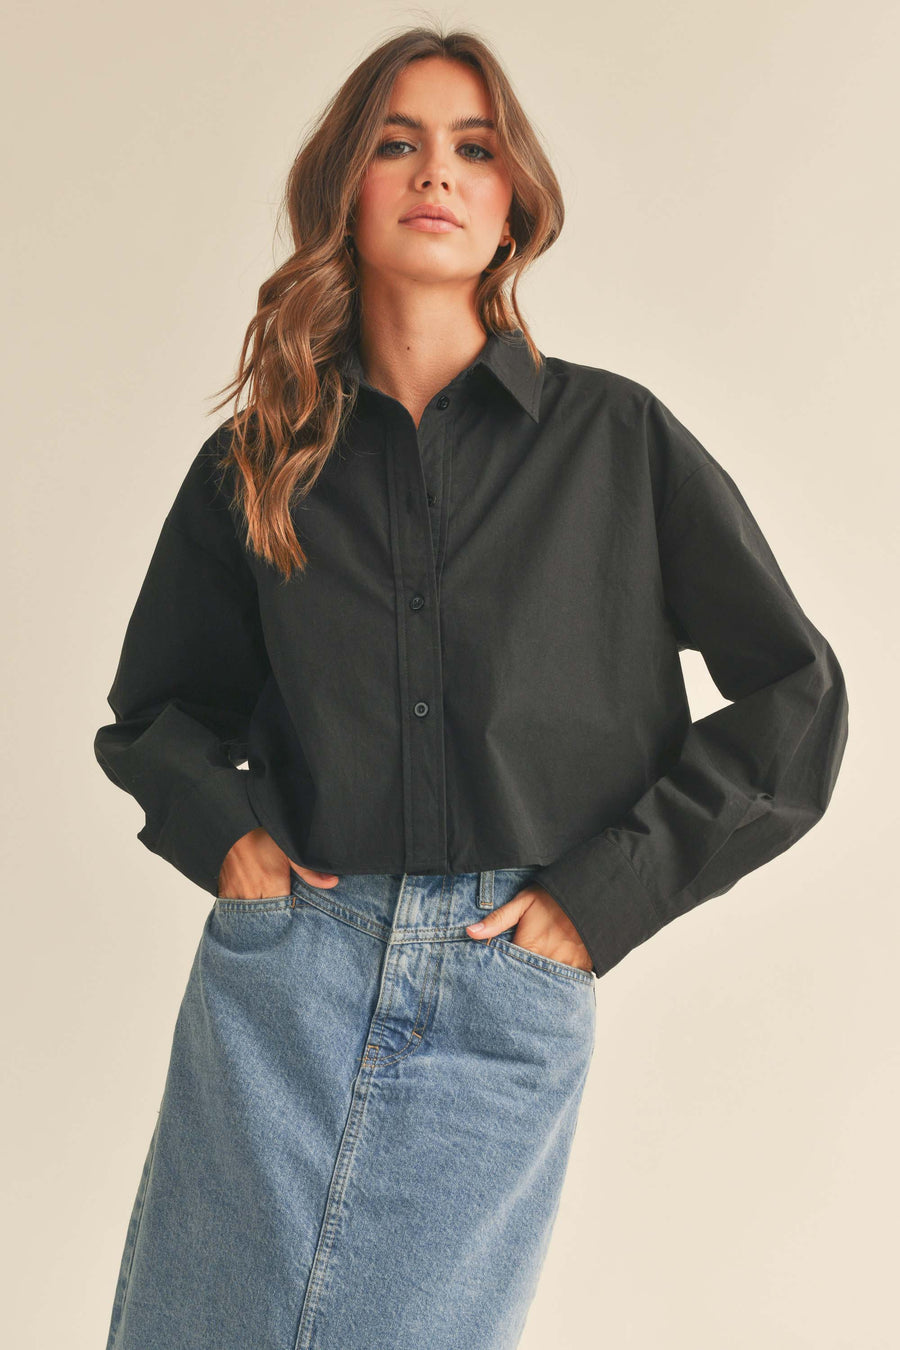 Cropped long sleeve button down shirt.